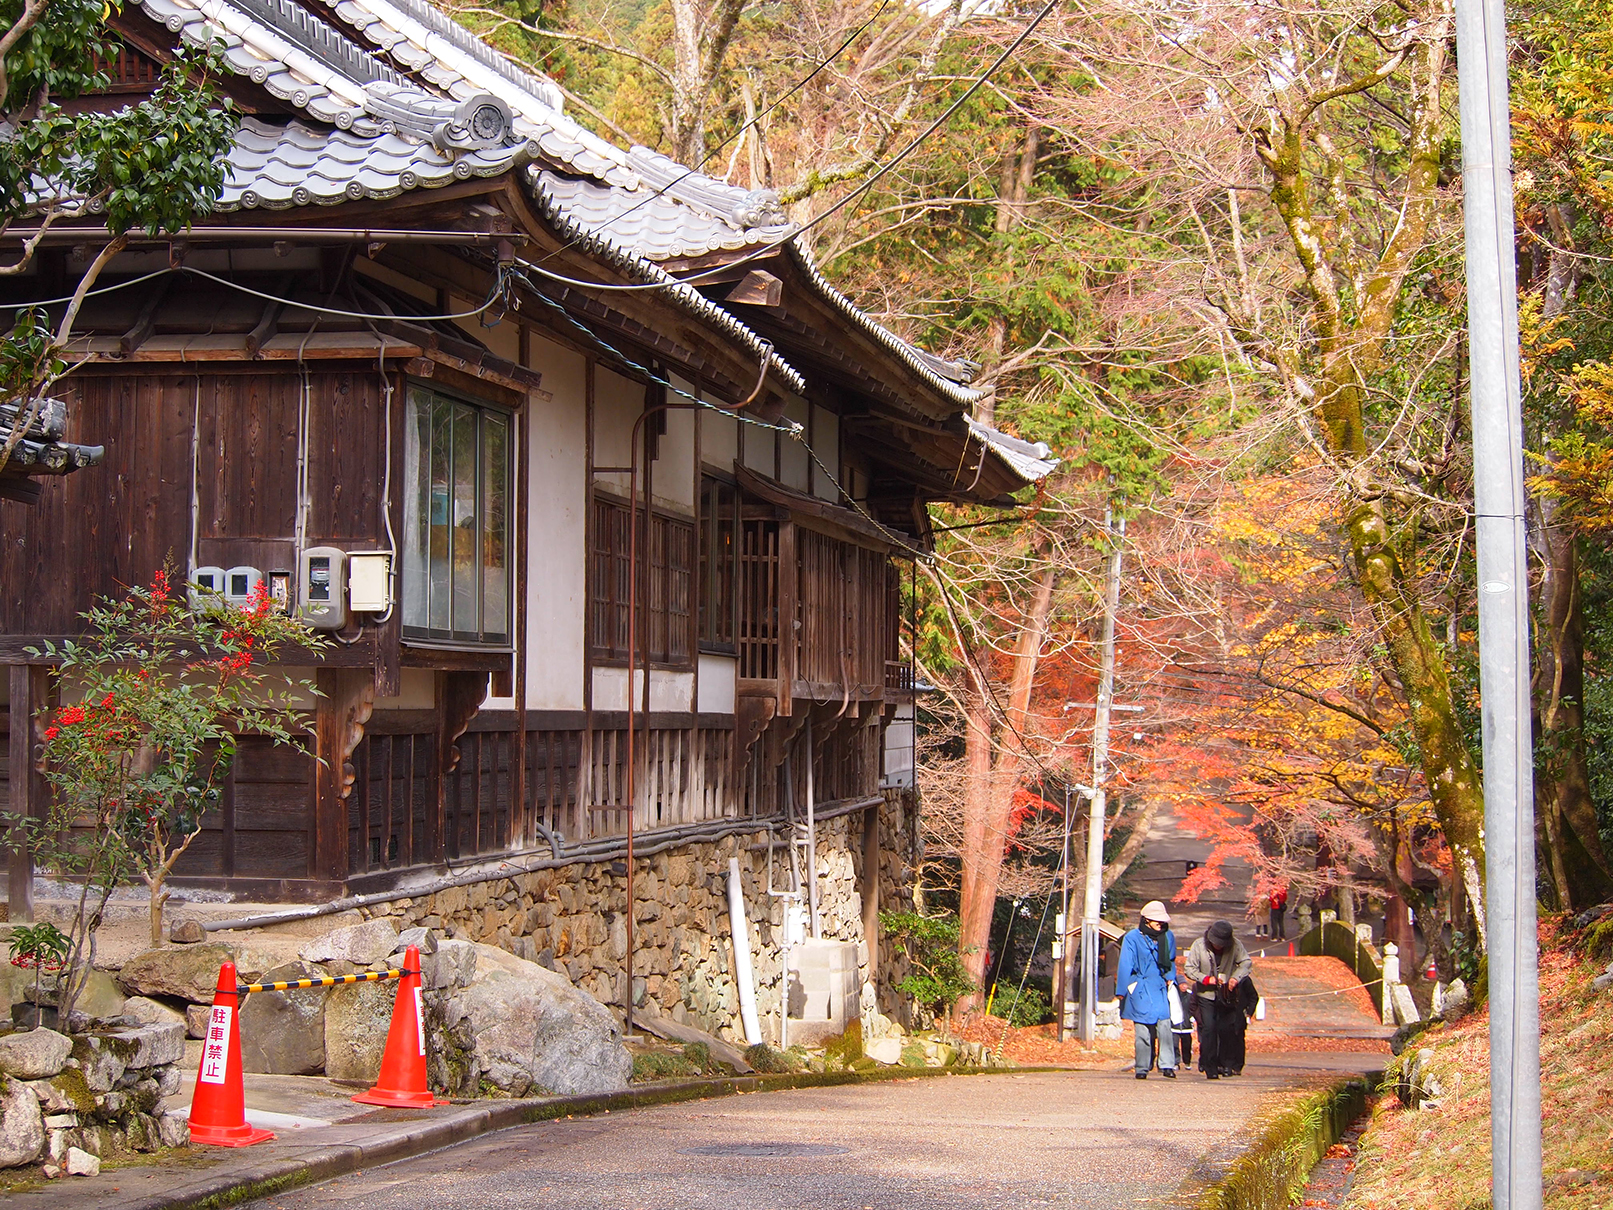 Impressions from the village at the foot of Mount Hiei.